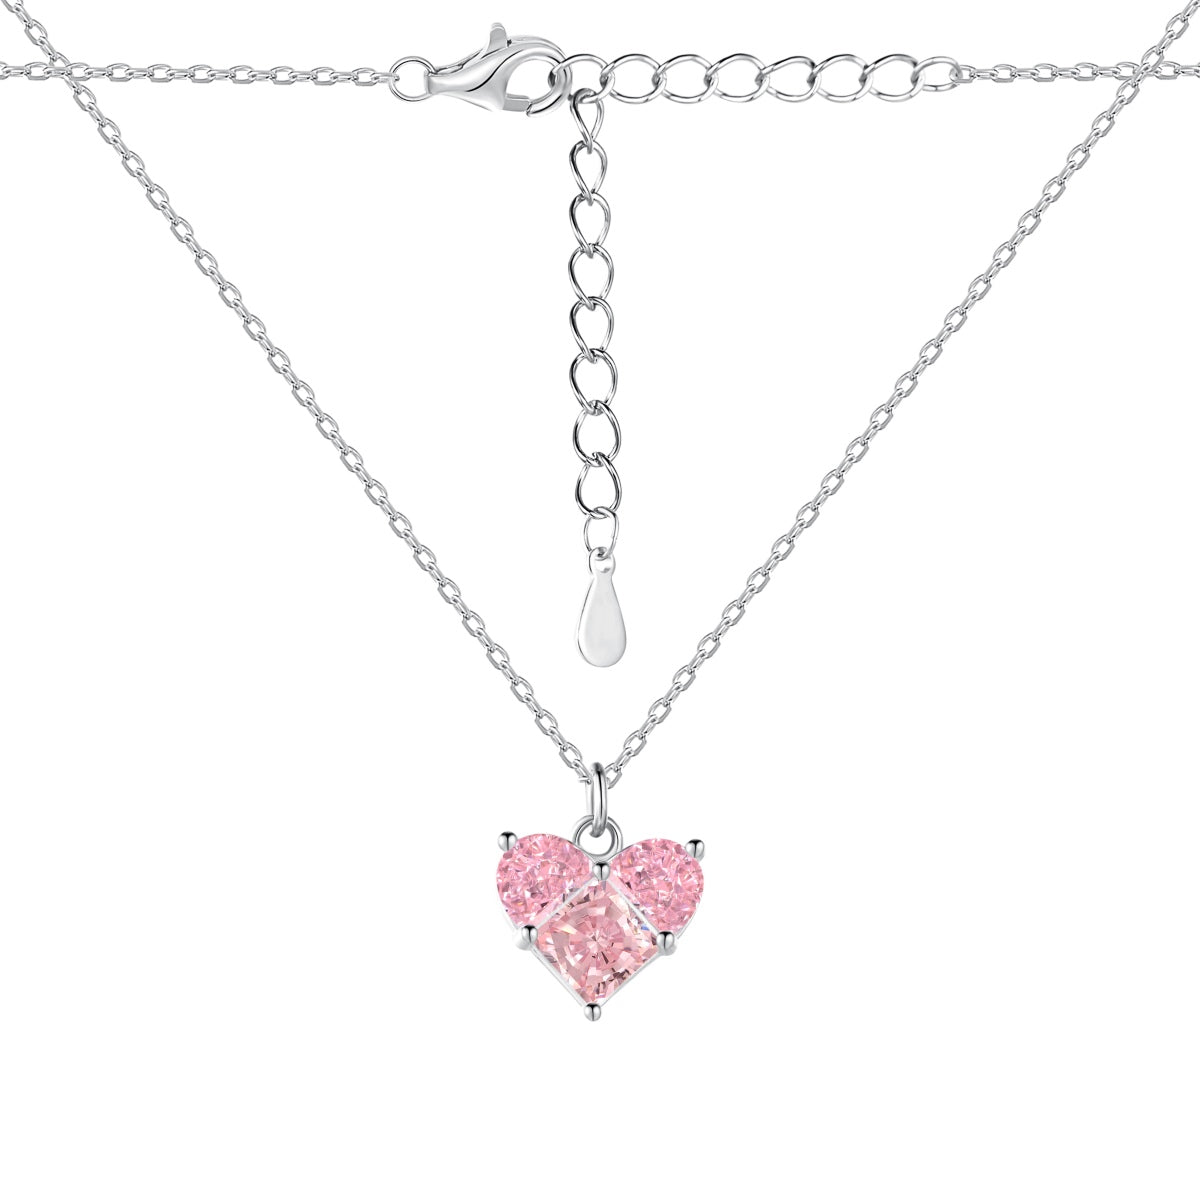 ICY HEART NECKLACE